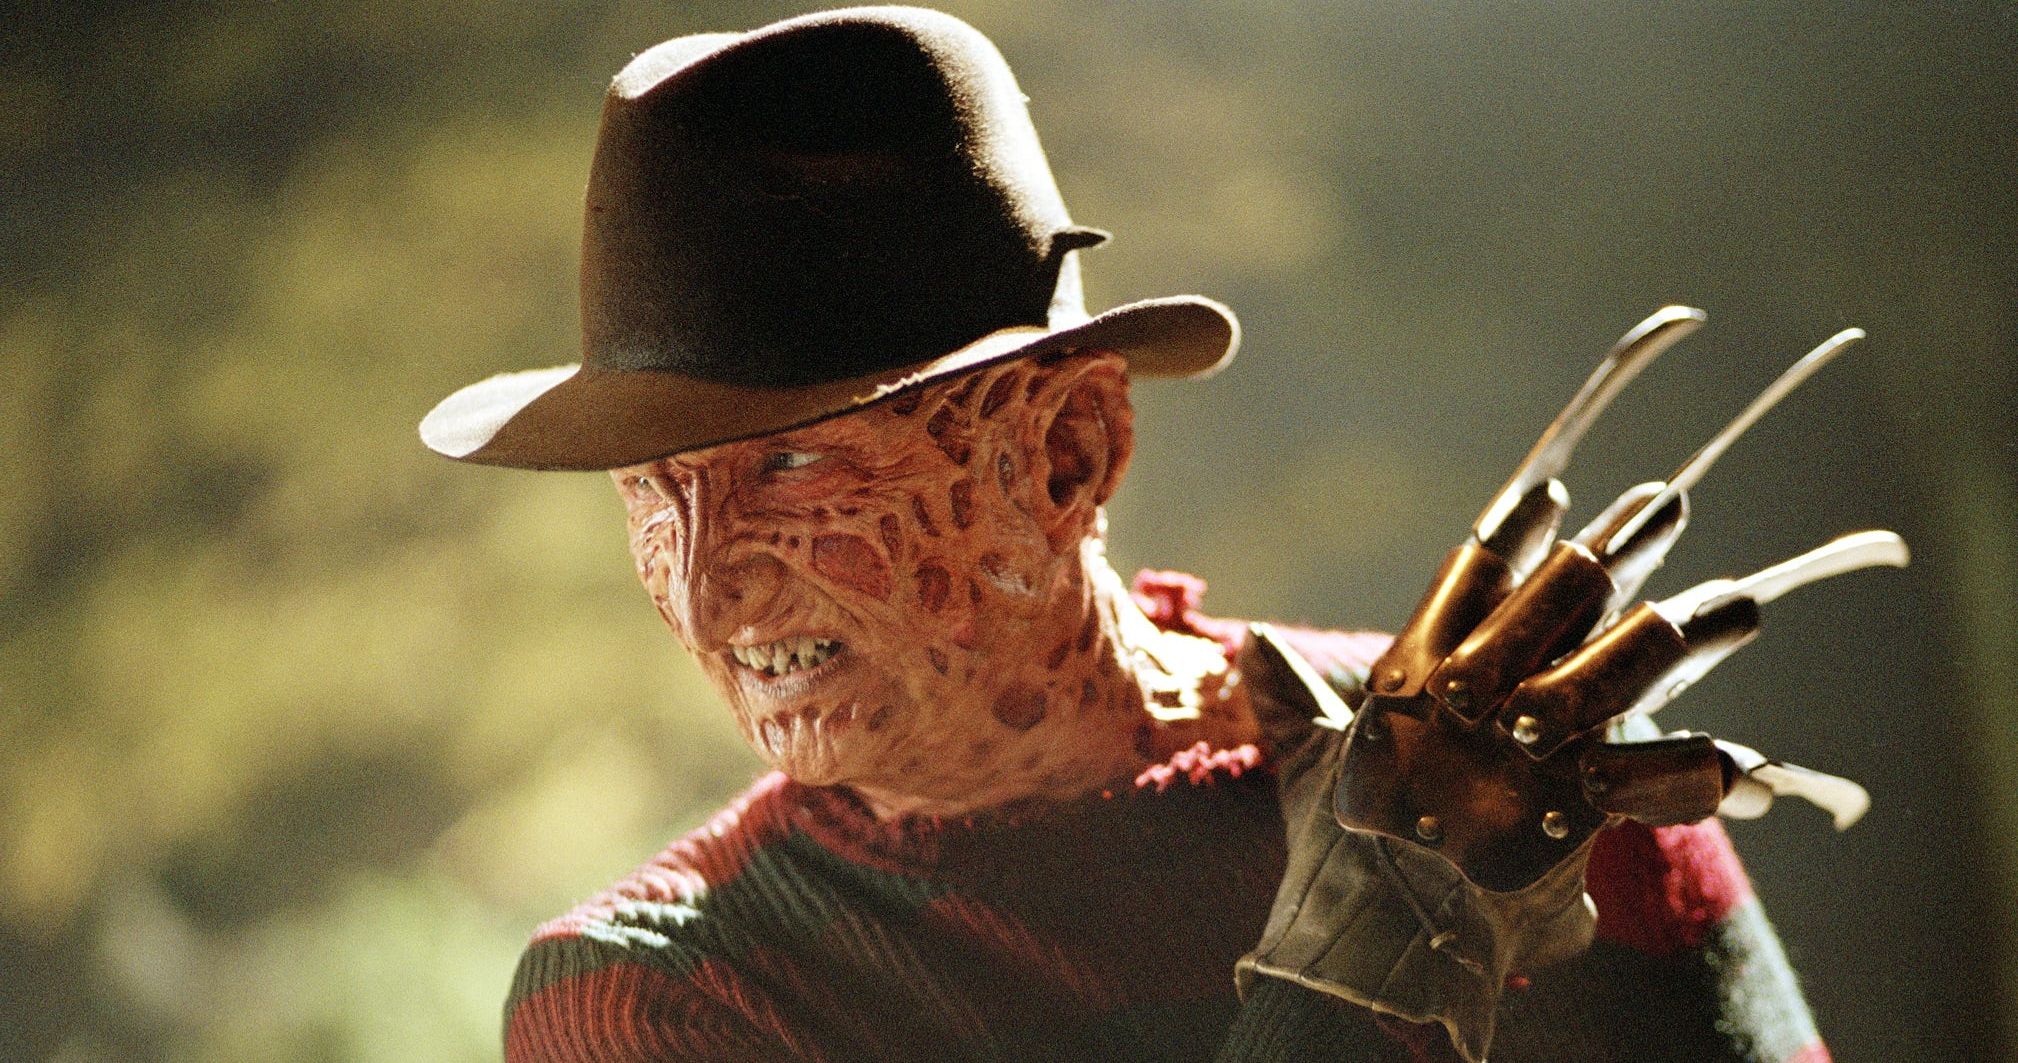 Robert Englund Weighs in on A Nightmare on Elm Street House Going Up for Sale